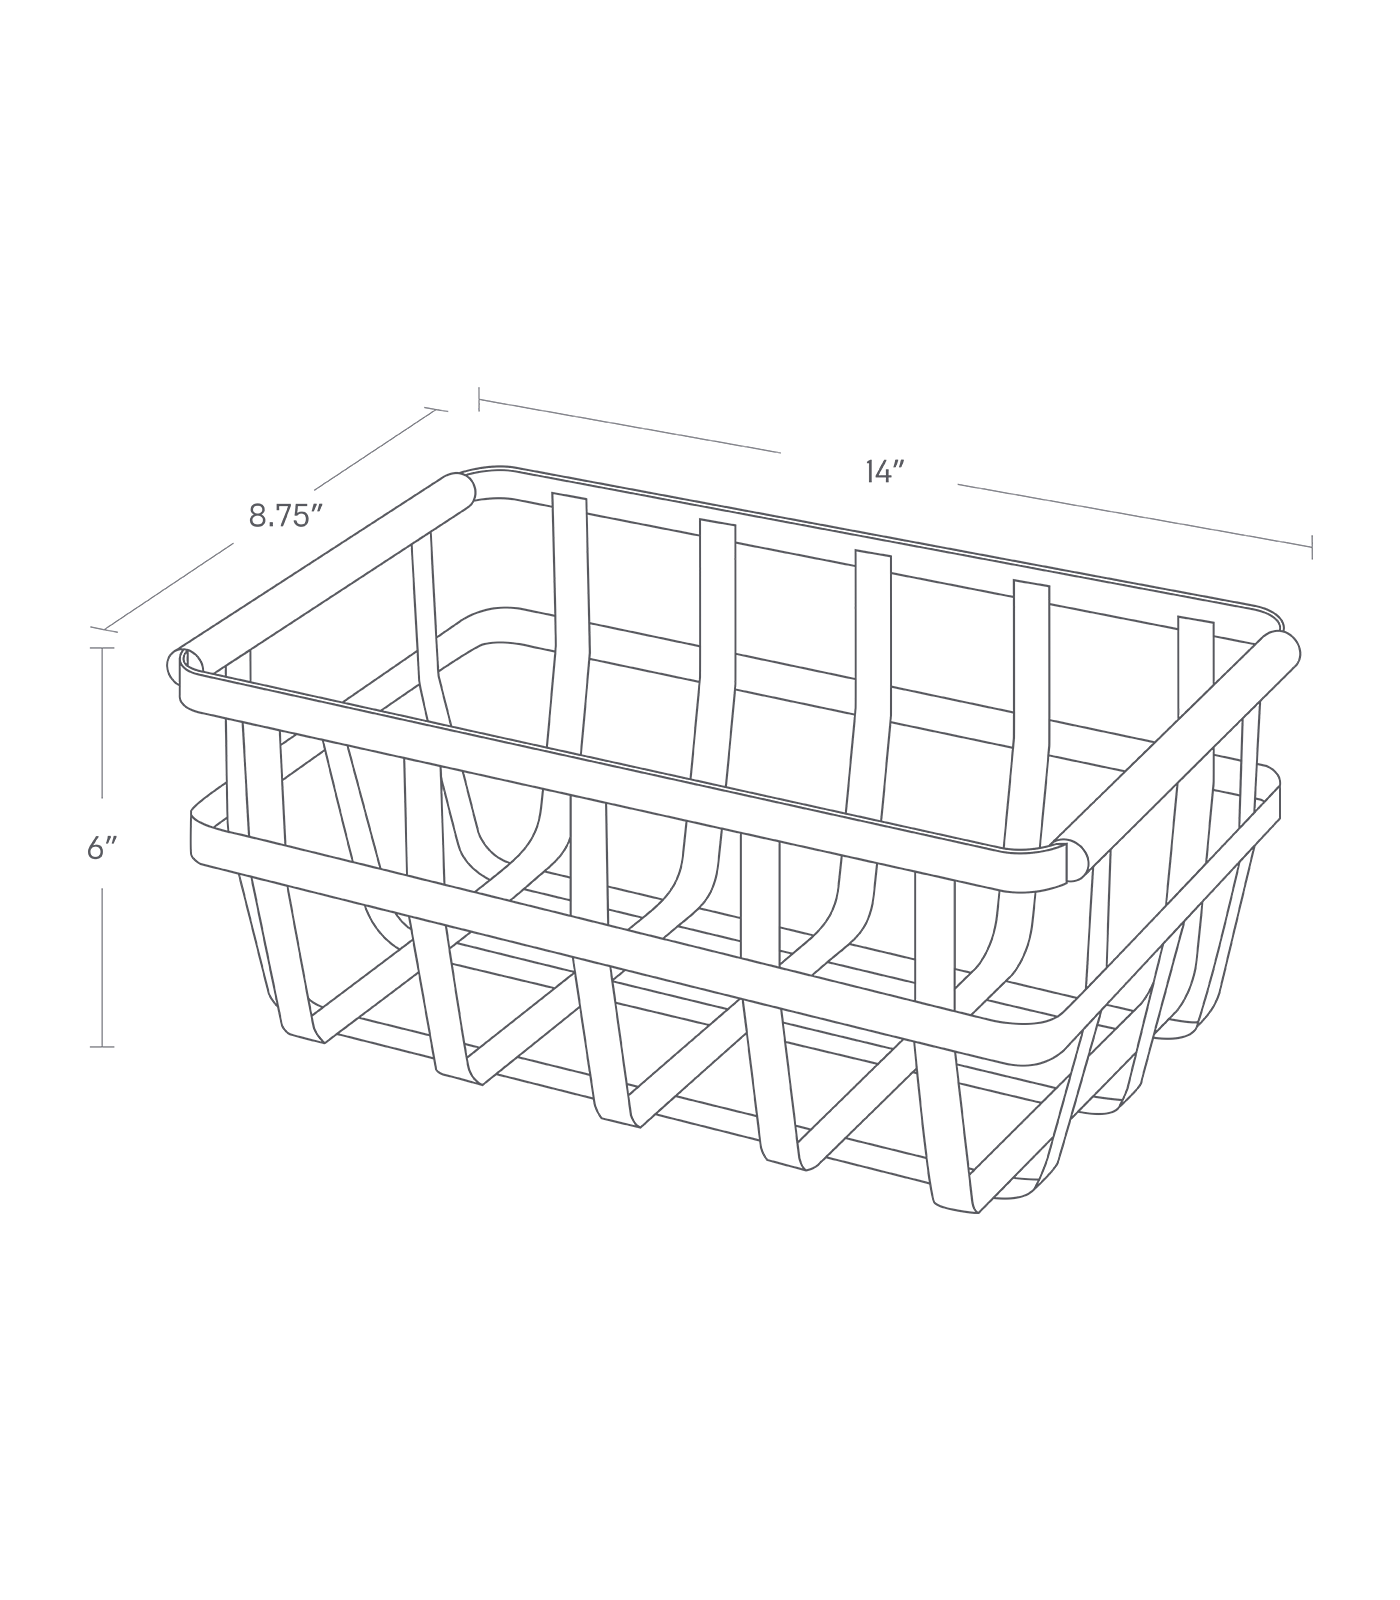 Dimension image for Storage Basket - Two Sizes on a white background including dimensions  L 8.66 x W 13.98 x H 6.1 inches